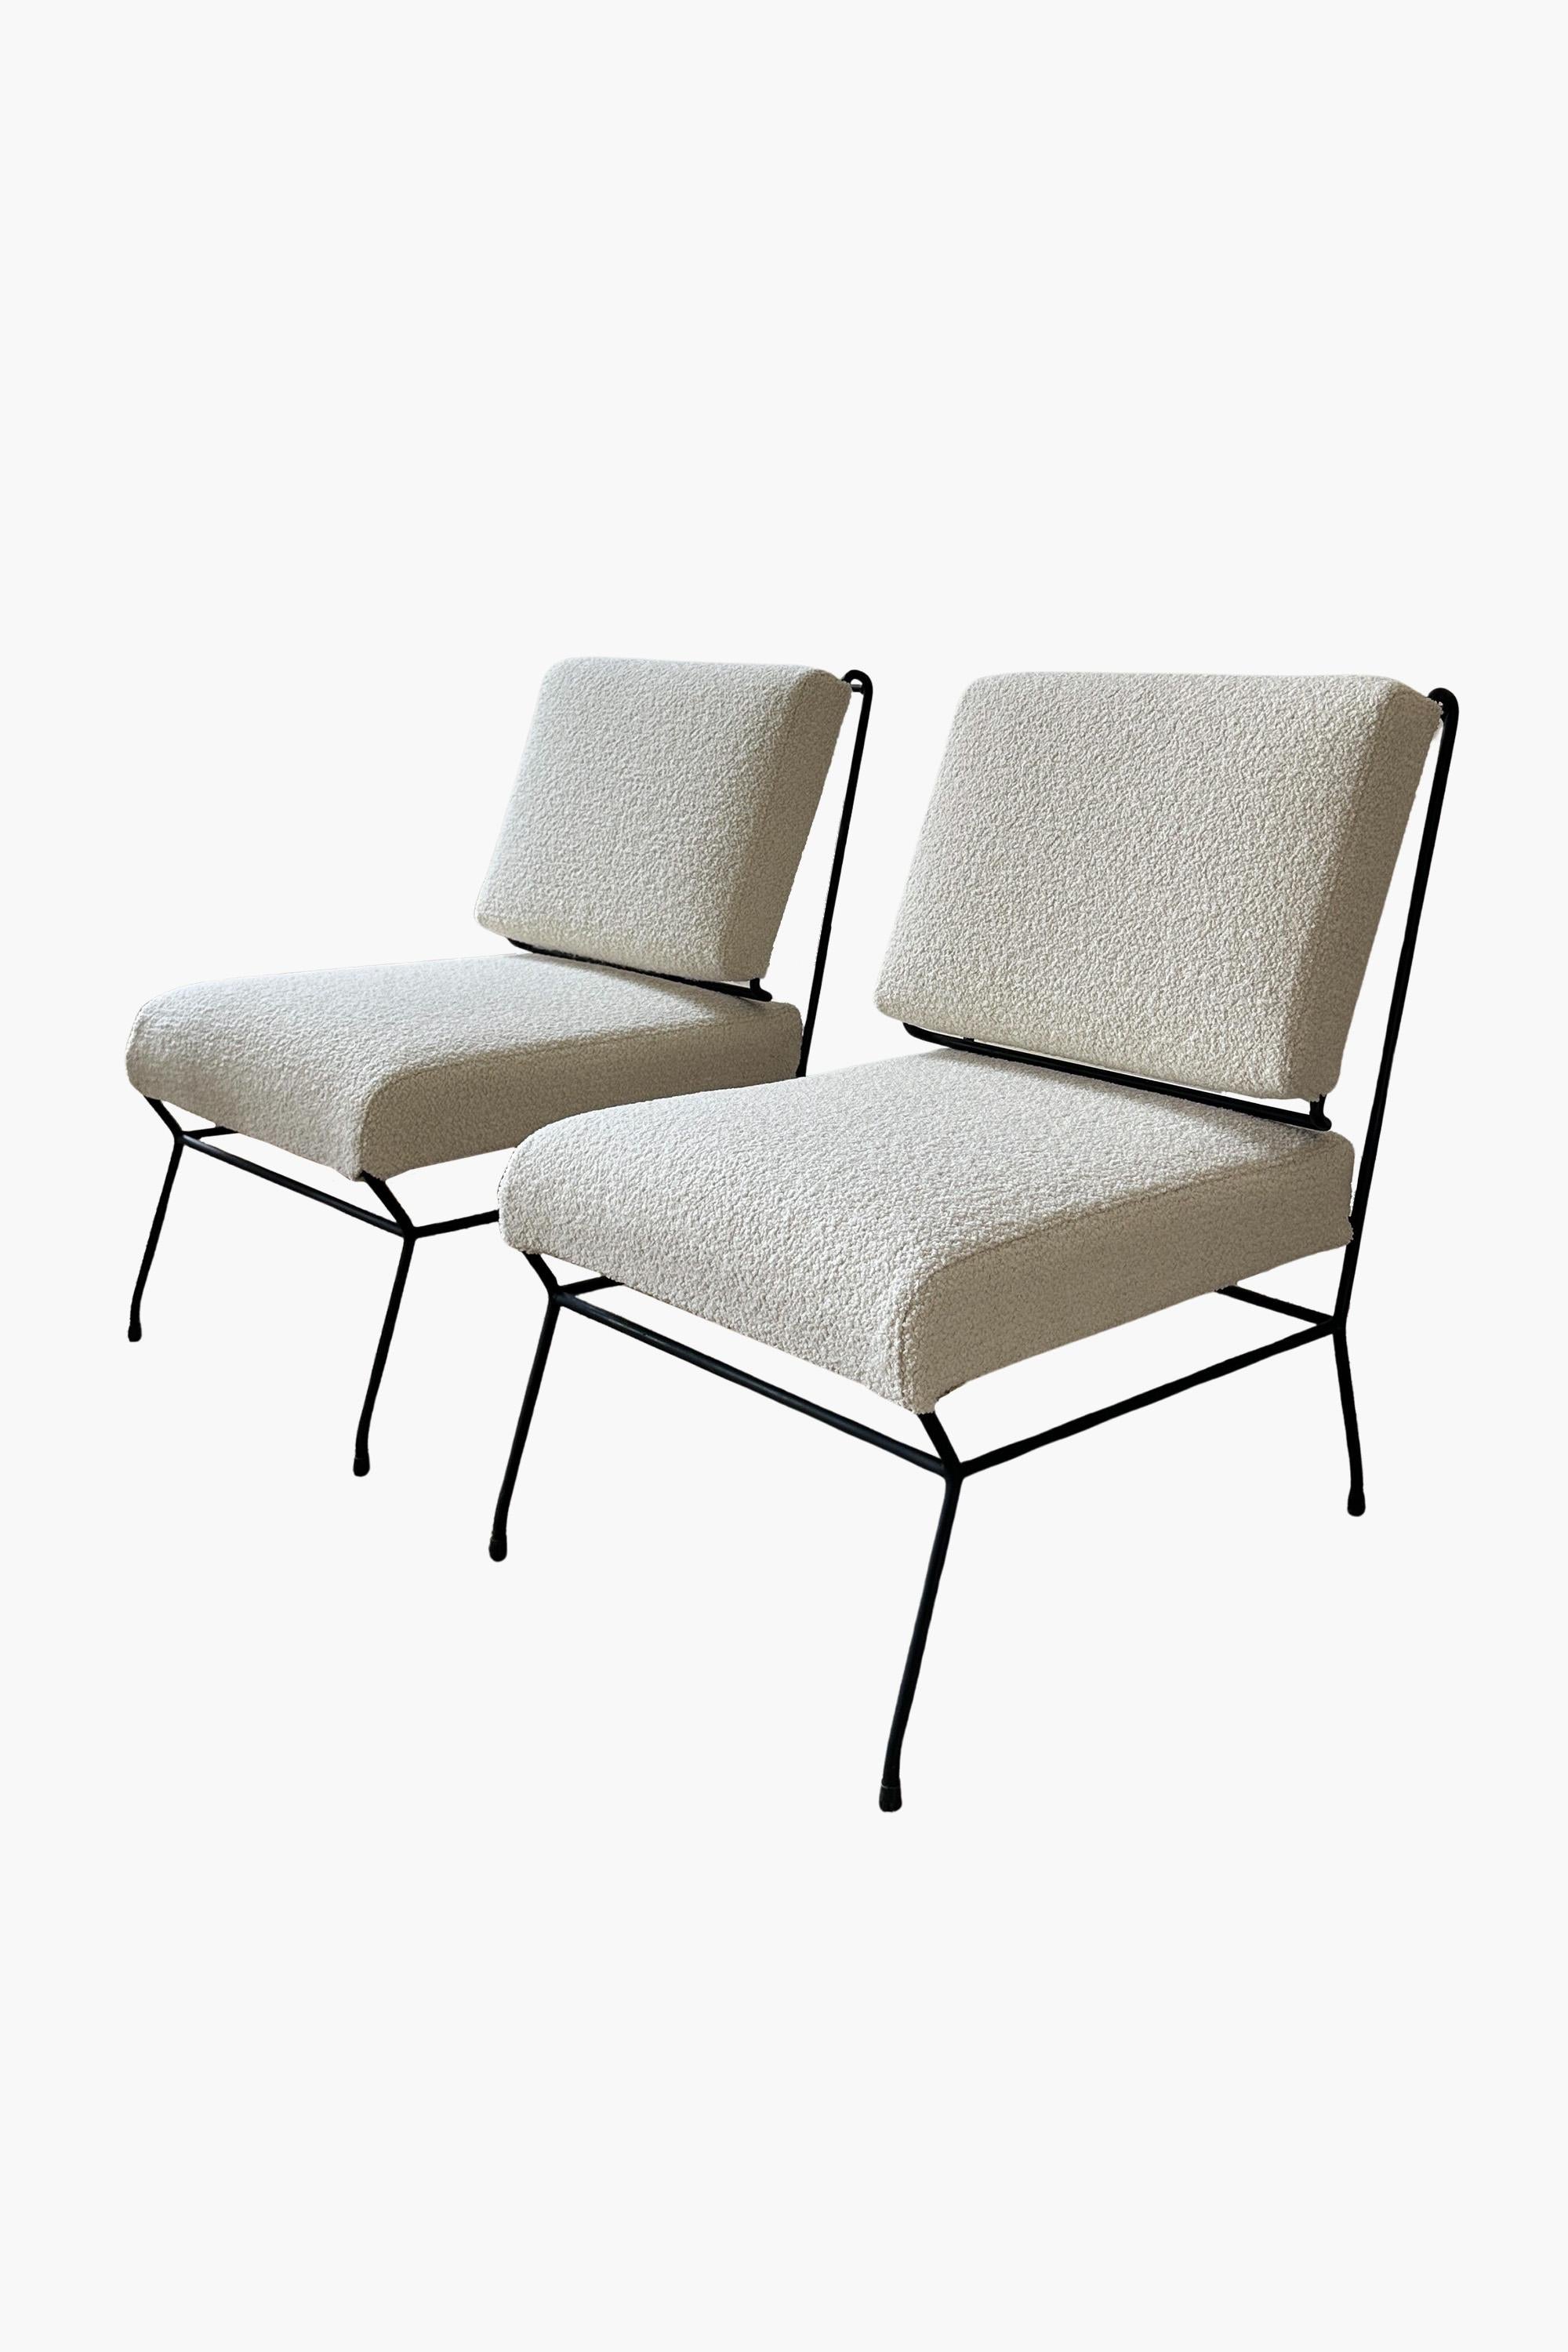 Rare Pair of Low Chairs by Gastone Rinaldi for Rima

A stylish pair of low-chairs designed by Gastone Rinaldi for RIMA. Lacquered tubular steel frame with rubber webbing and foam upholstery. The steel frame forms a cantilever back.

Completely